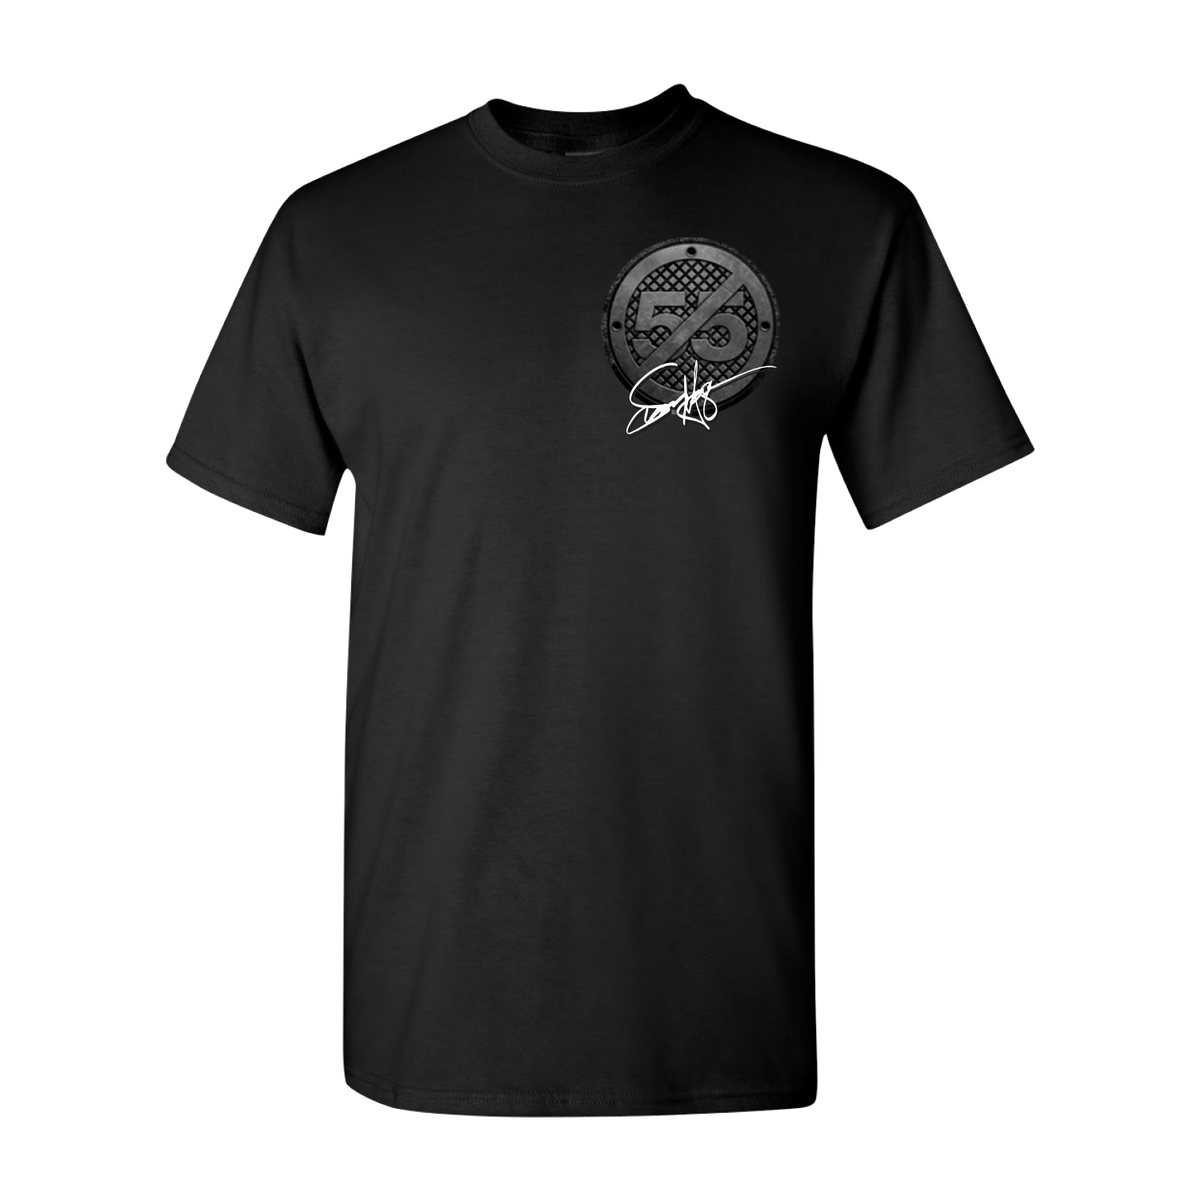 Sammy Hagar and The Circle &quot;55 Manhole Cover&quot; Tee